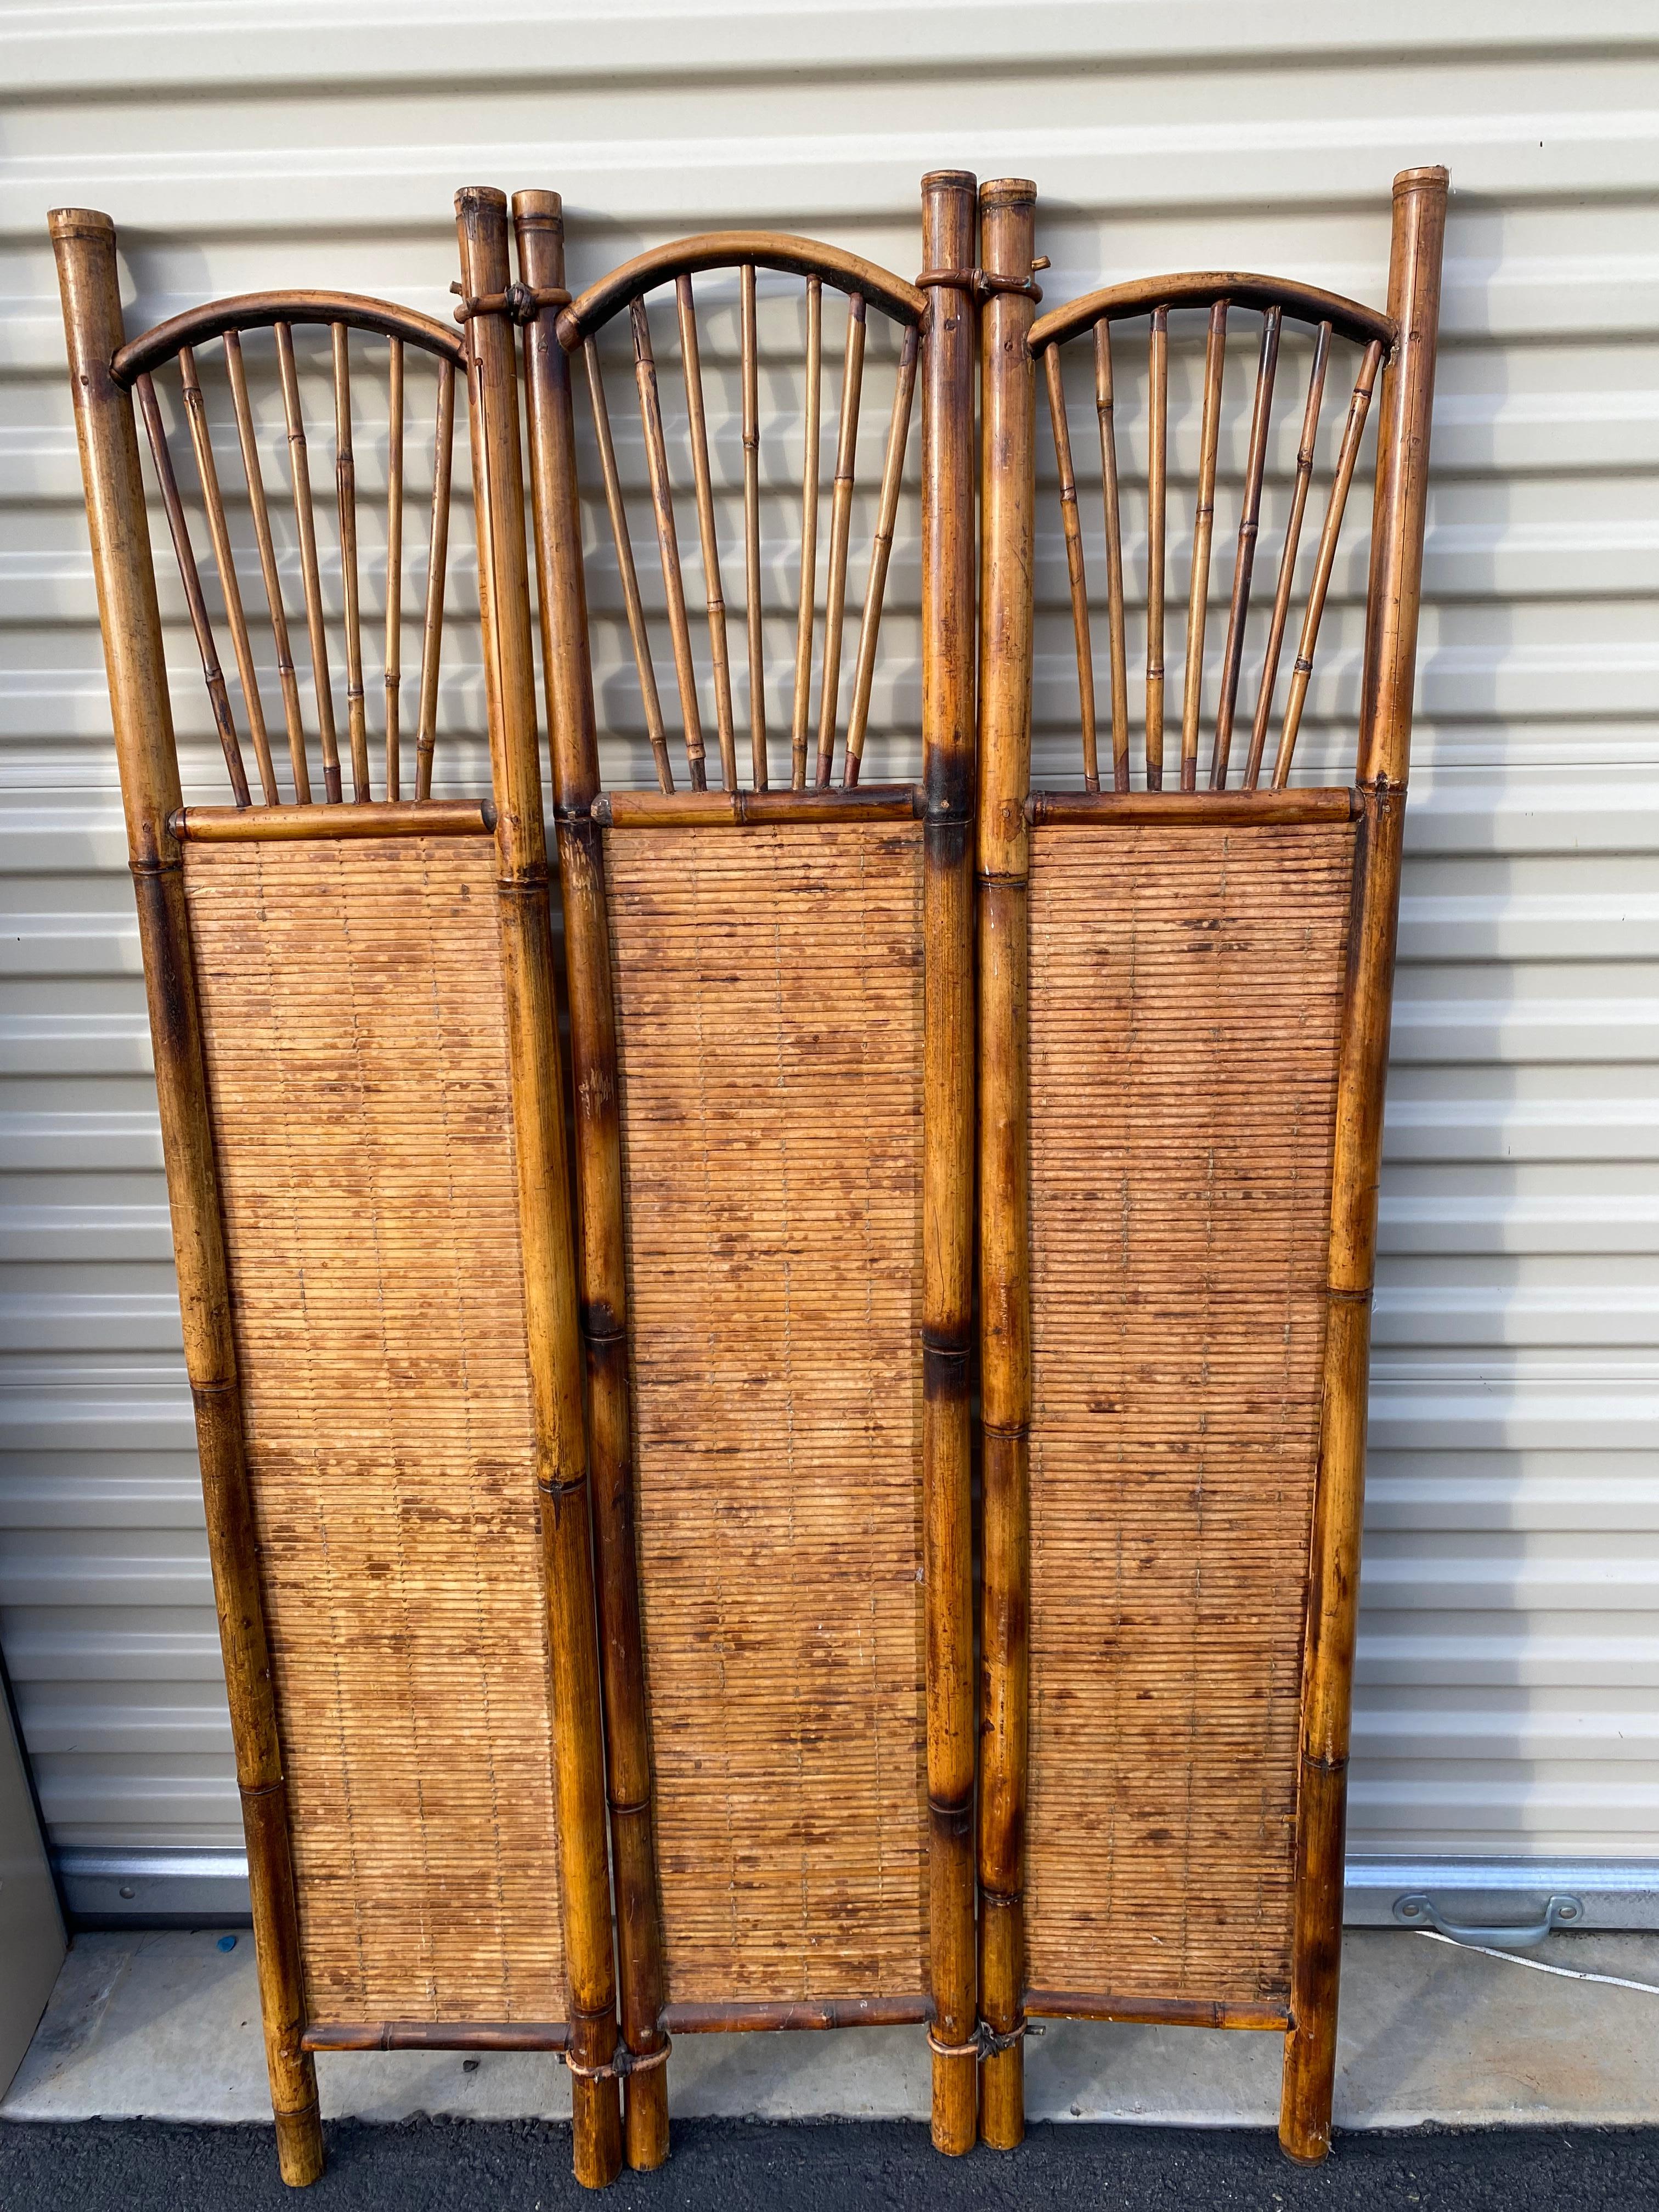 Beautiful vintage bamboo room Divider. Would also make a nice back drop for a blank wall. Gorgeous dark and light tones.